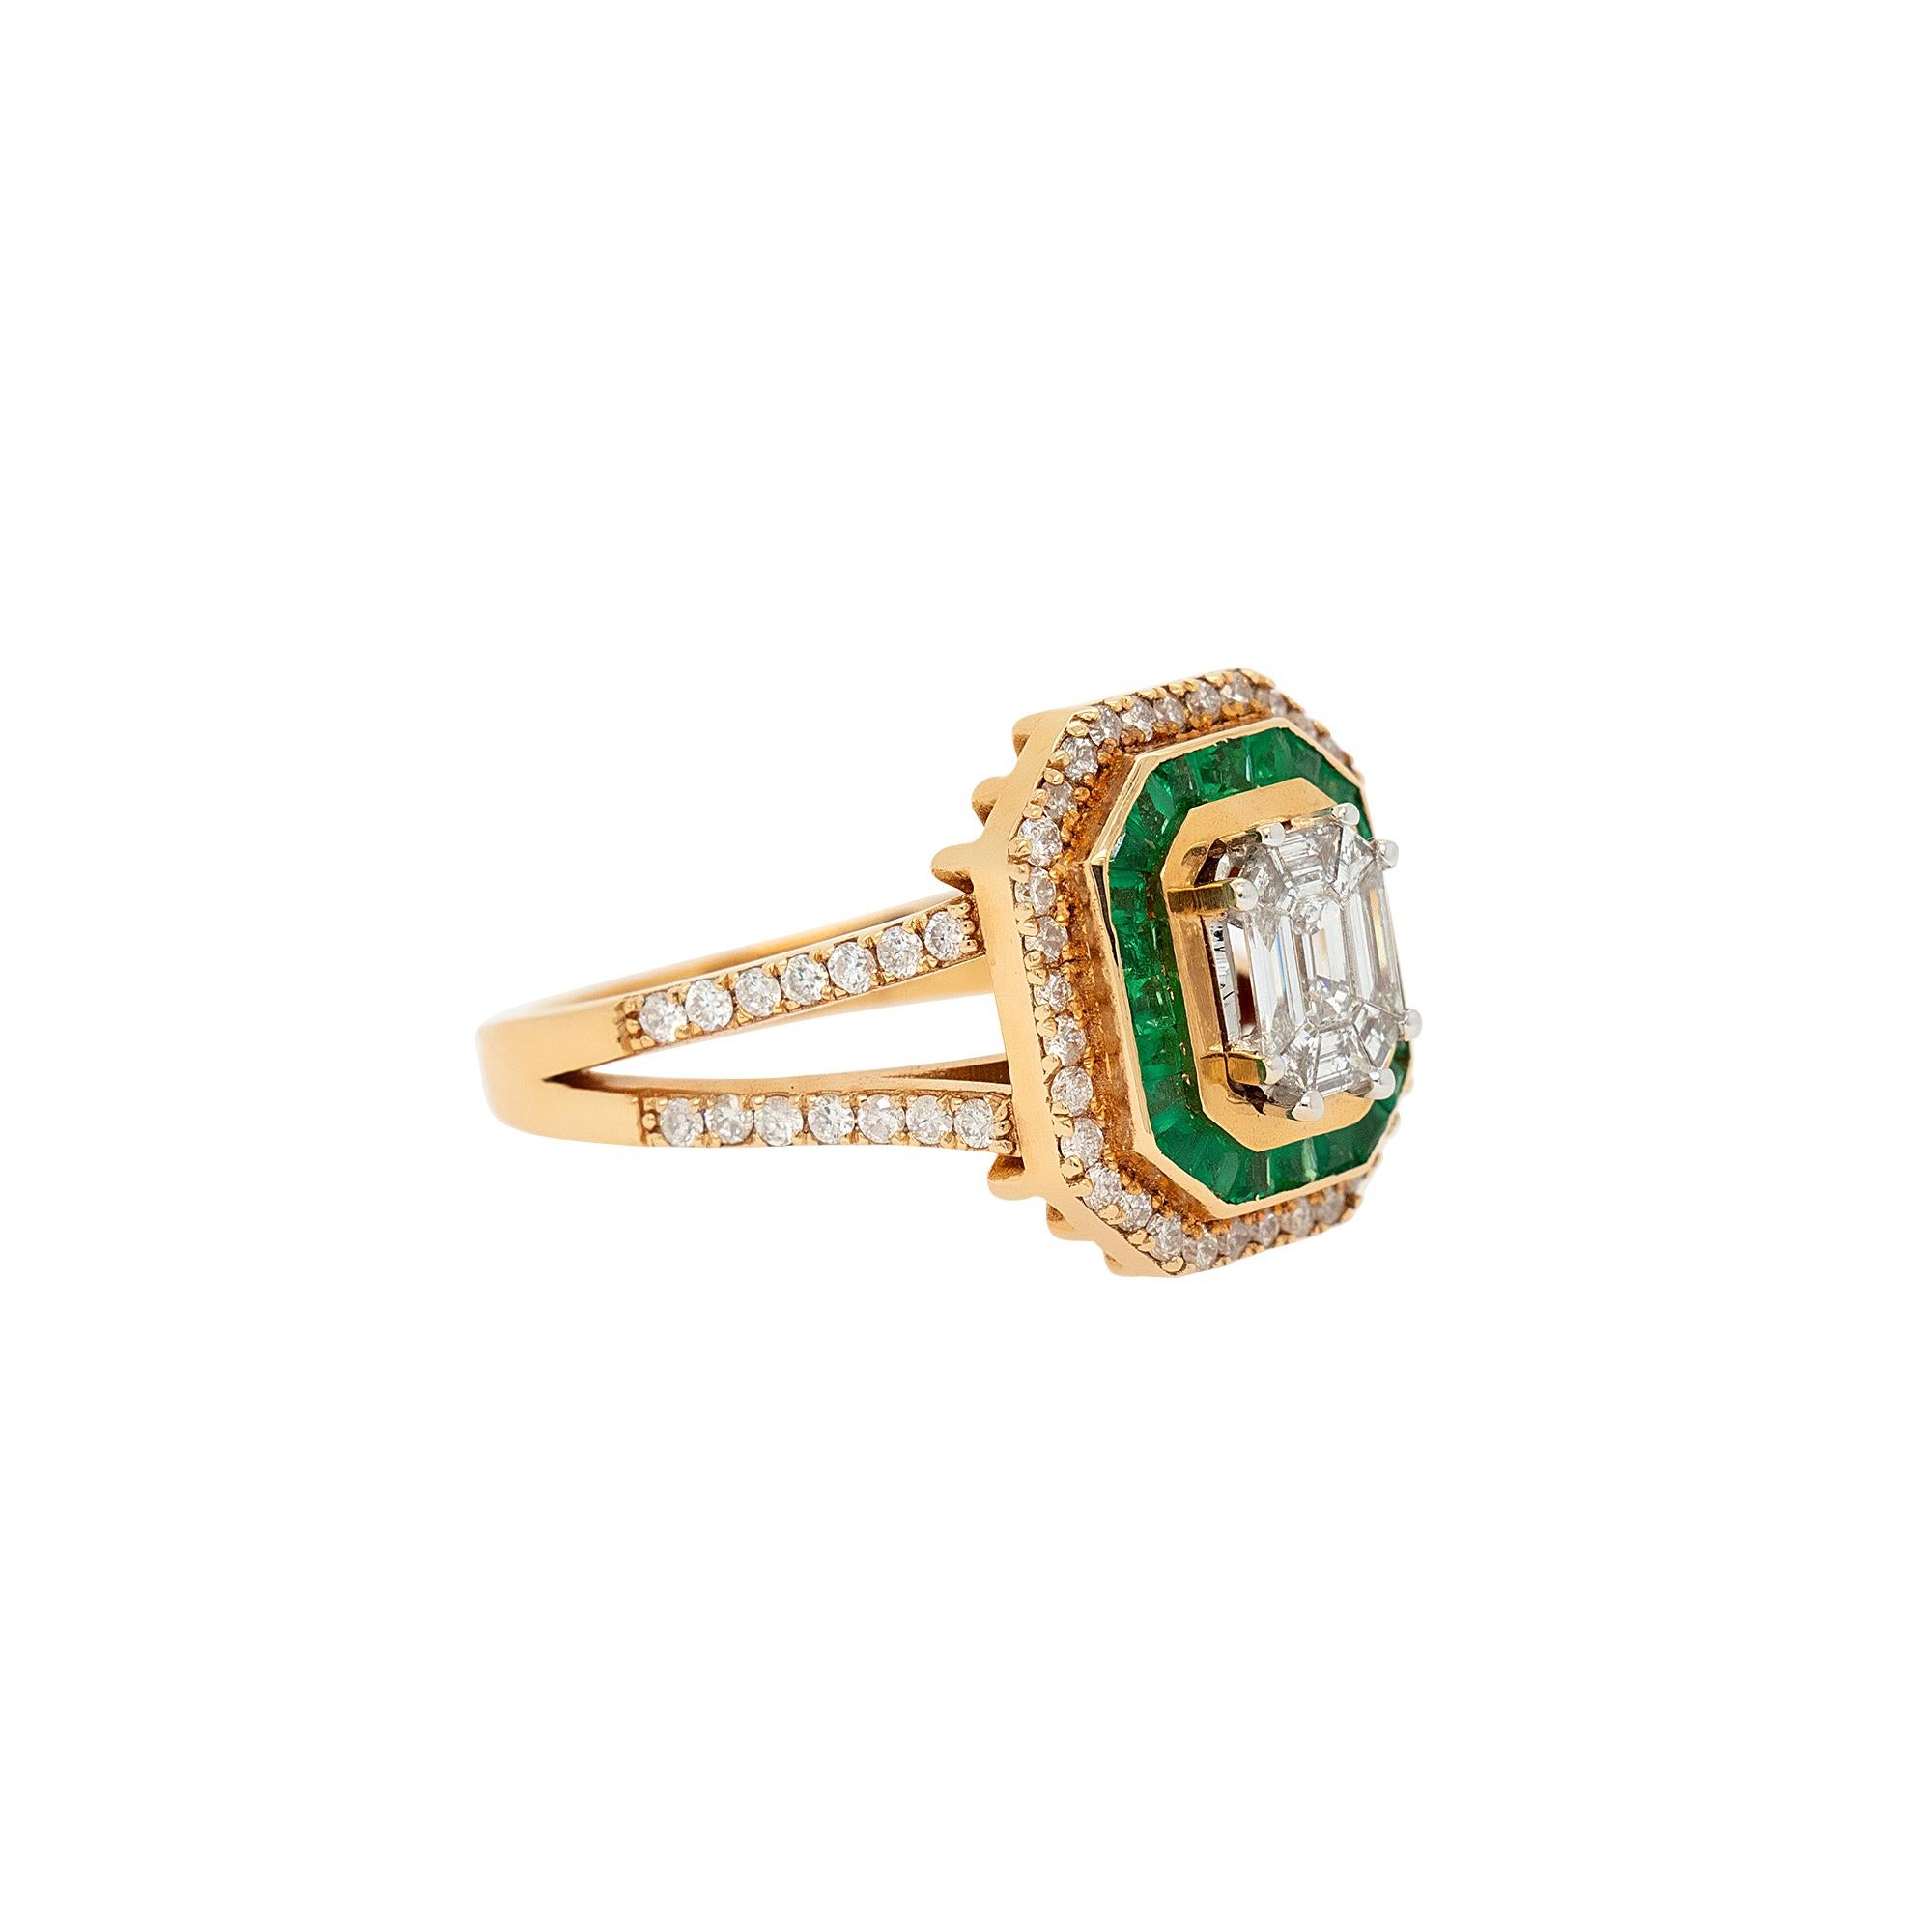 Center Details: 
Approx Diamons: 0.91ctw
Approx Emeralds: 0.55ctw
Ring Material:
18k Yellow Gold 
20mm x 26mm x 14mm
Ring Size: 6.75 (can be sized)
Total Weight: 7.6g (4.9dwt)
This item comes with a presentation box!
SKU: R5578

Adorn your hand with